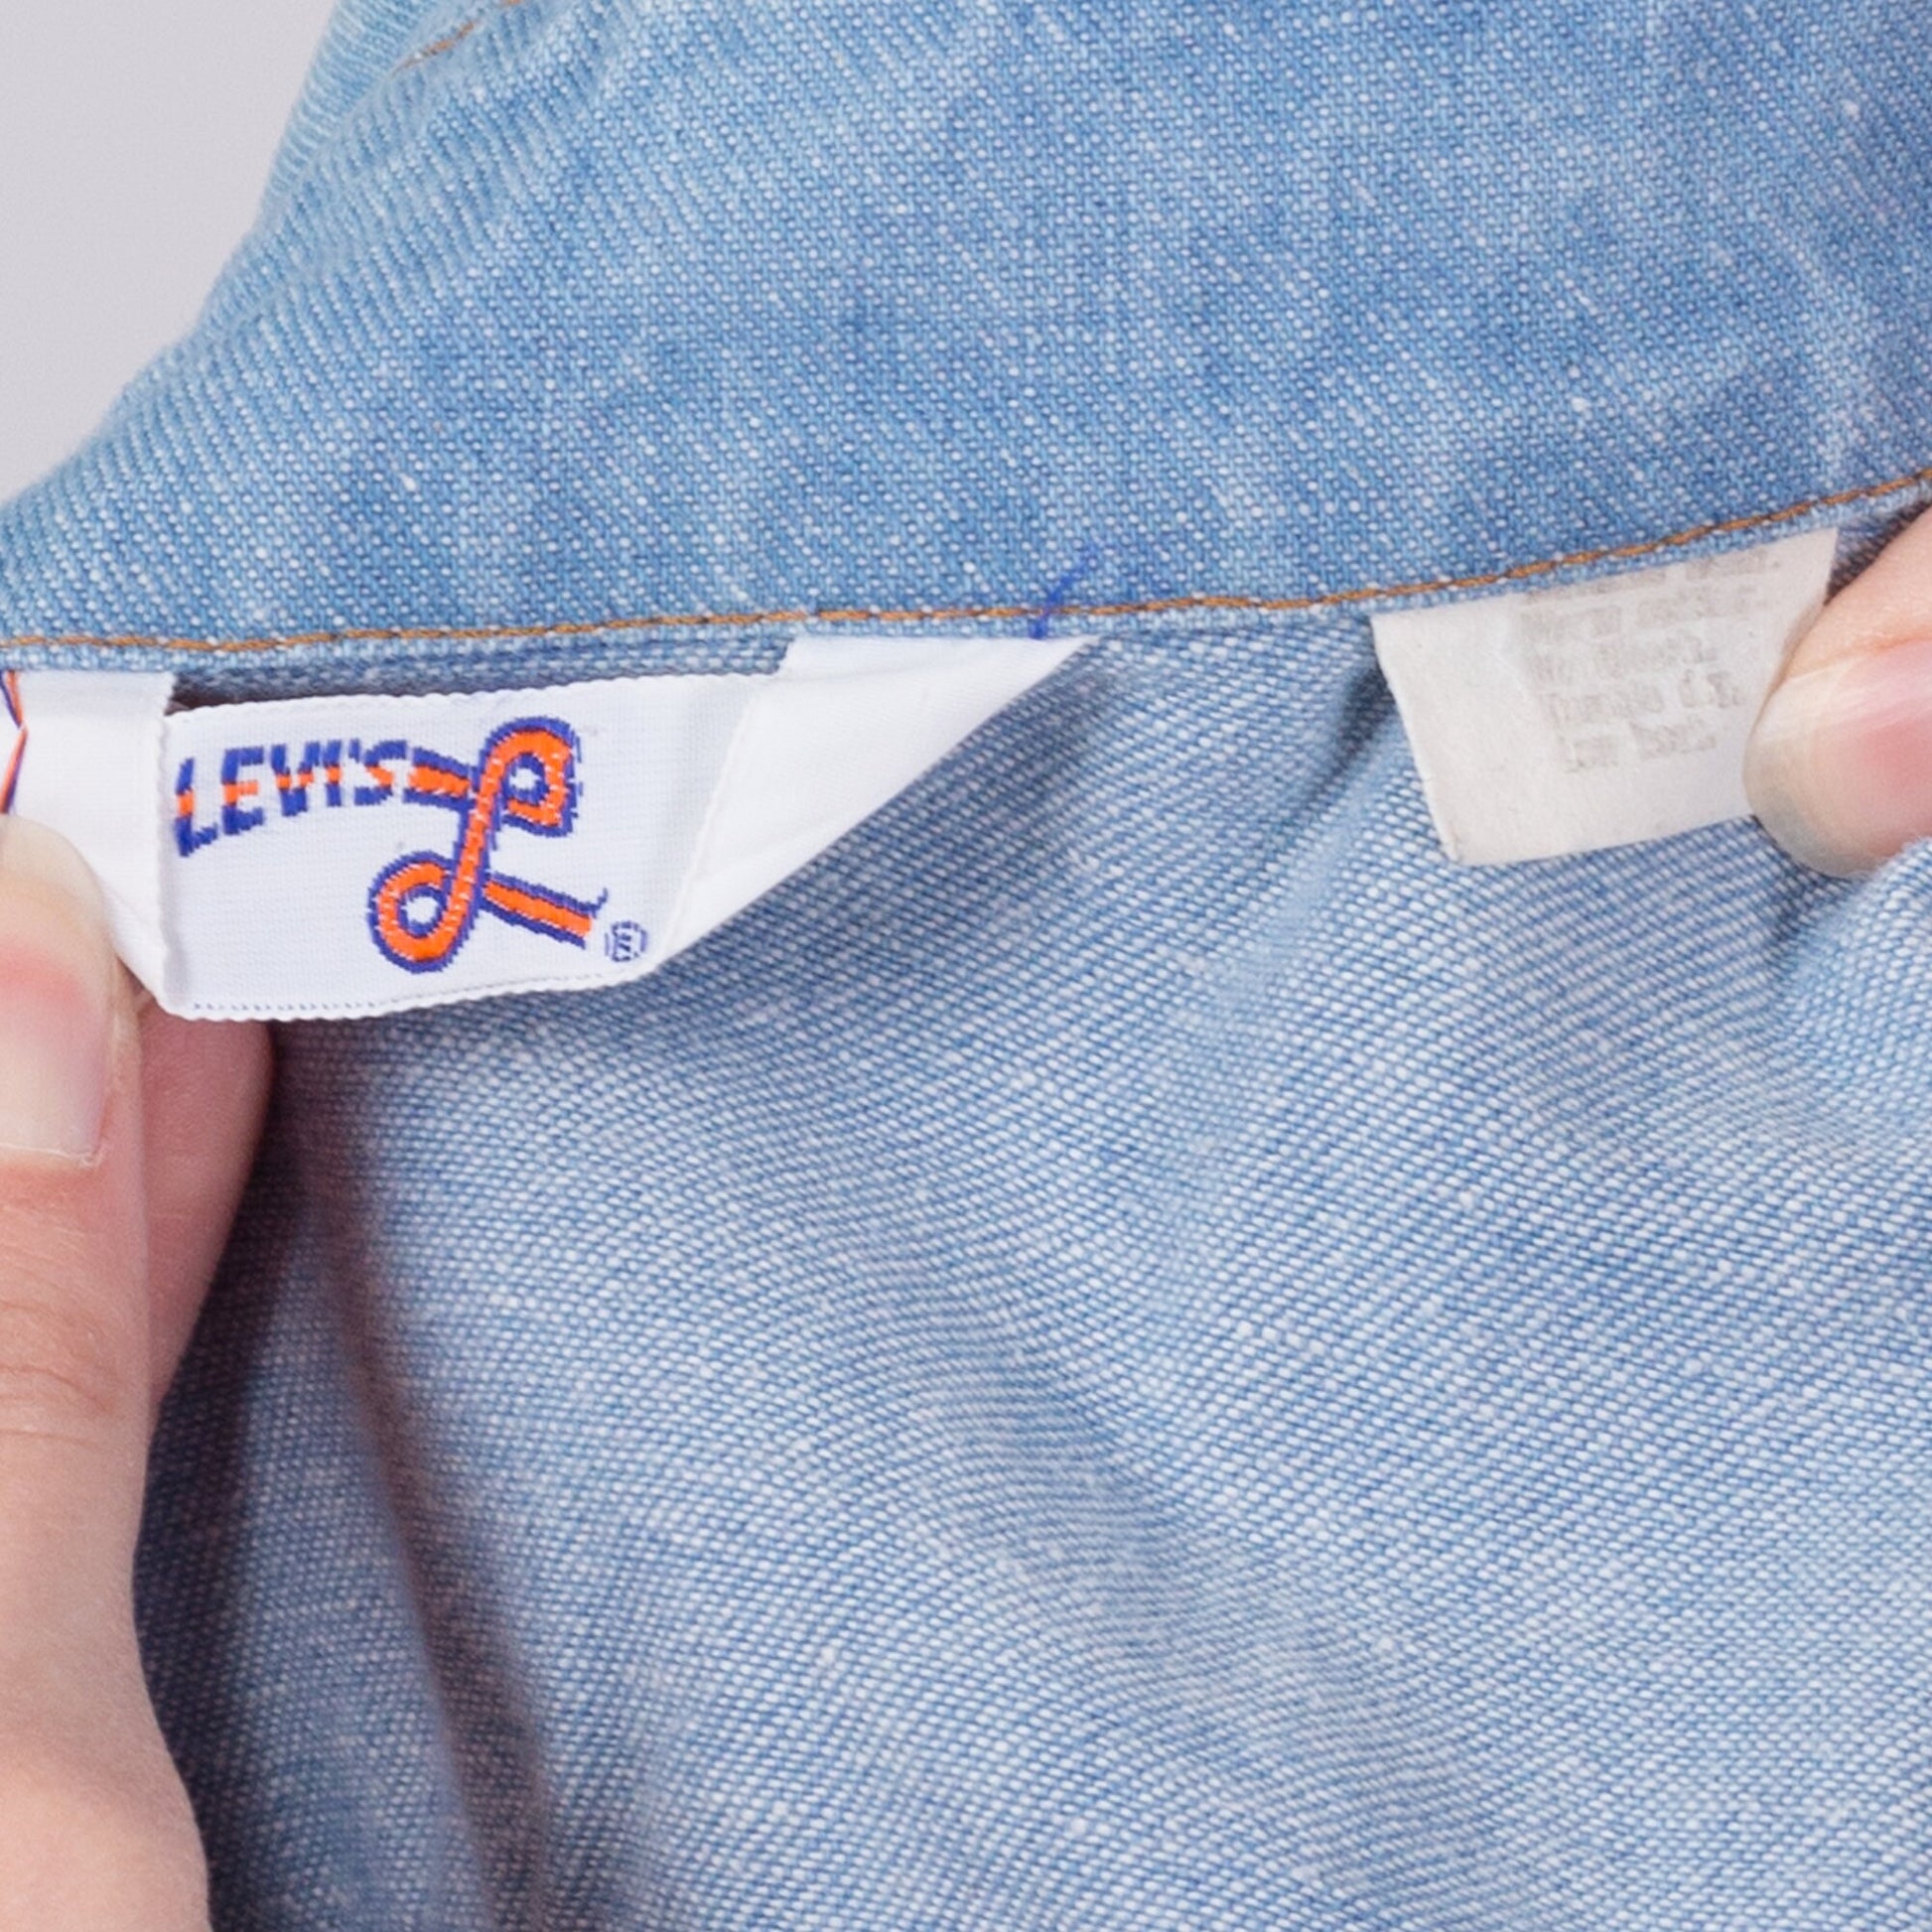 70s Levis Cropped Jean Jacket - Extra Small 